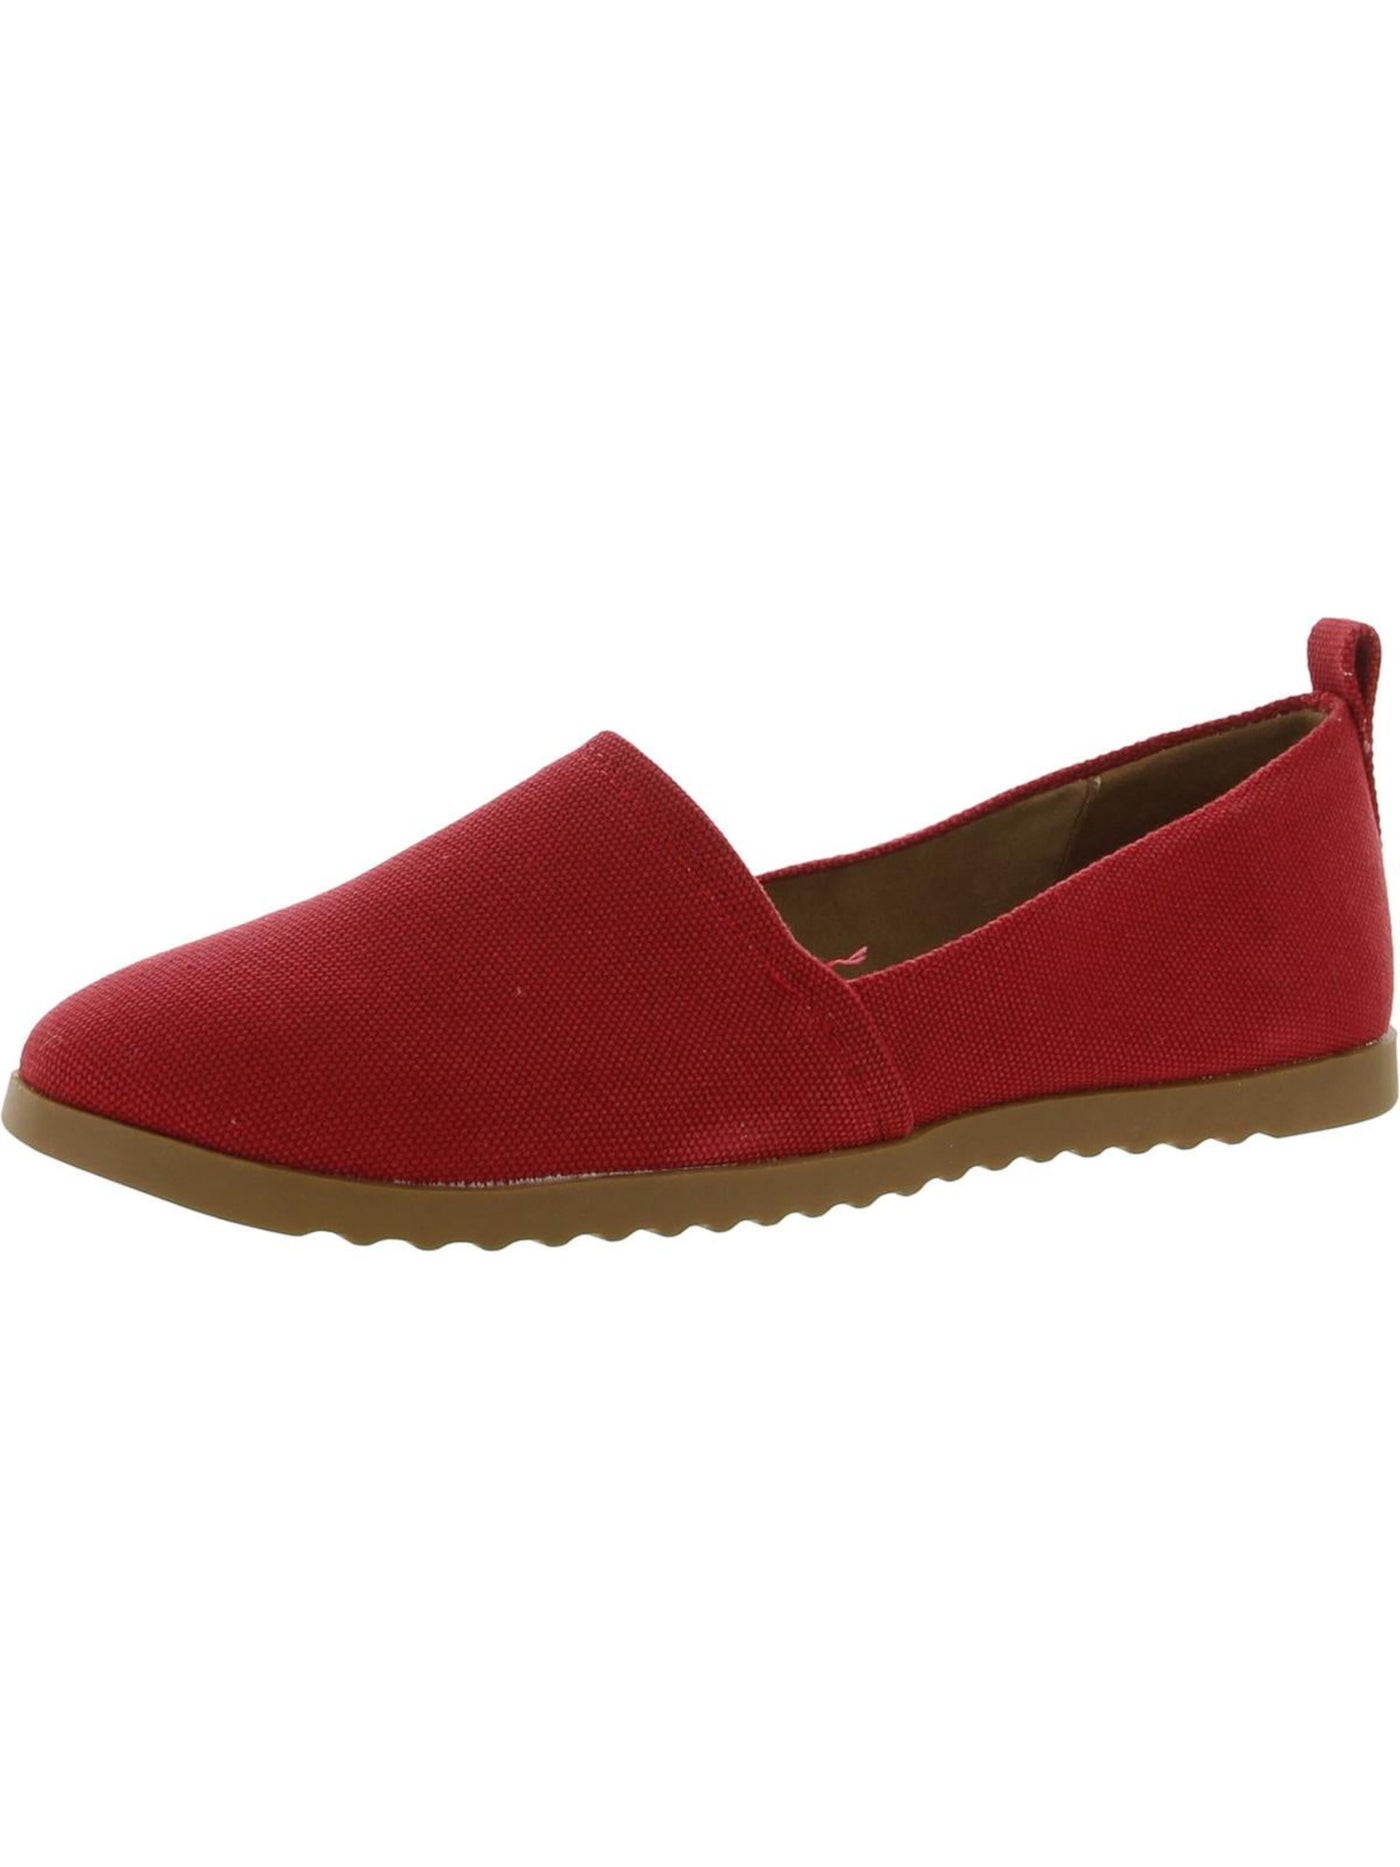 STYLE & COMPANY Womens Red Cushioned Nouraa Round Toe Slip On Flats Shoes 5.5 M